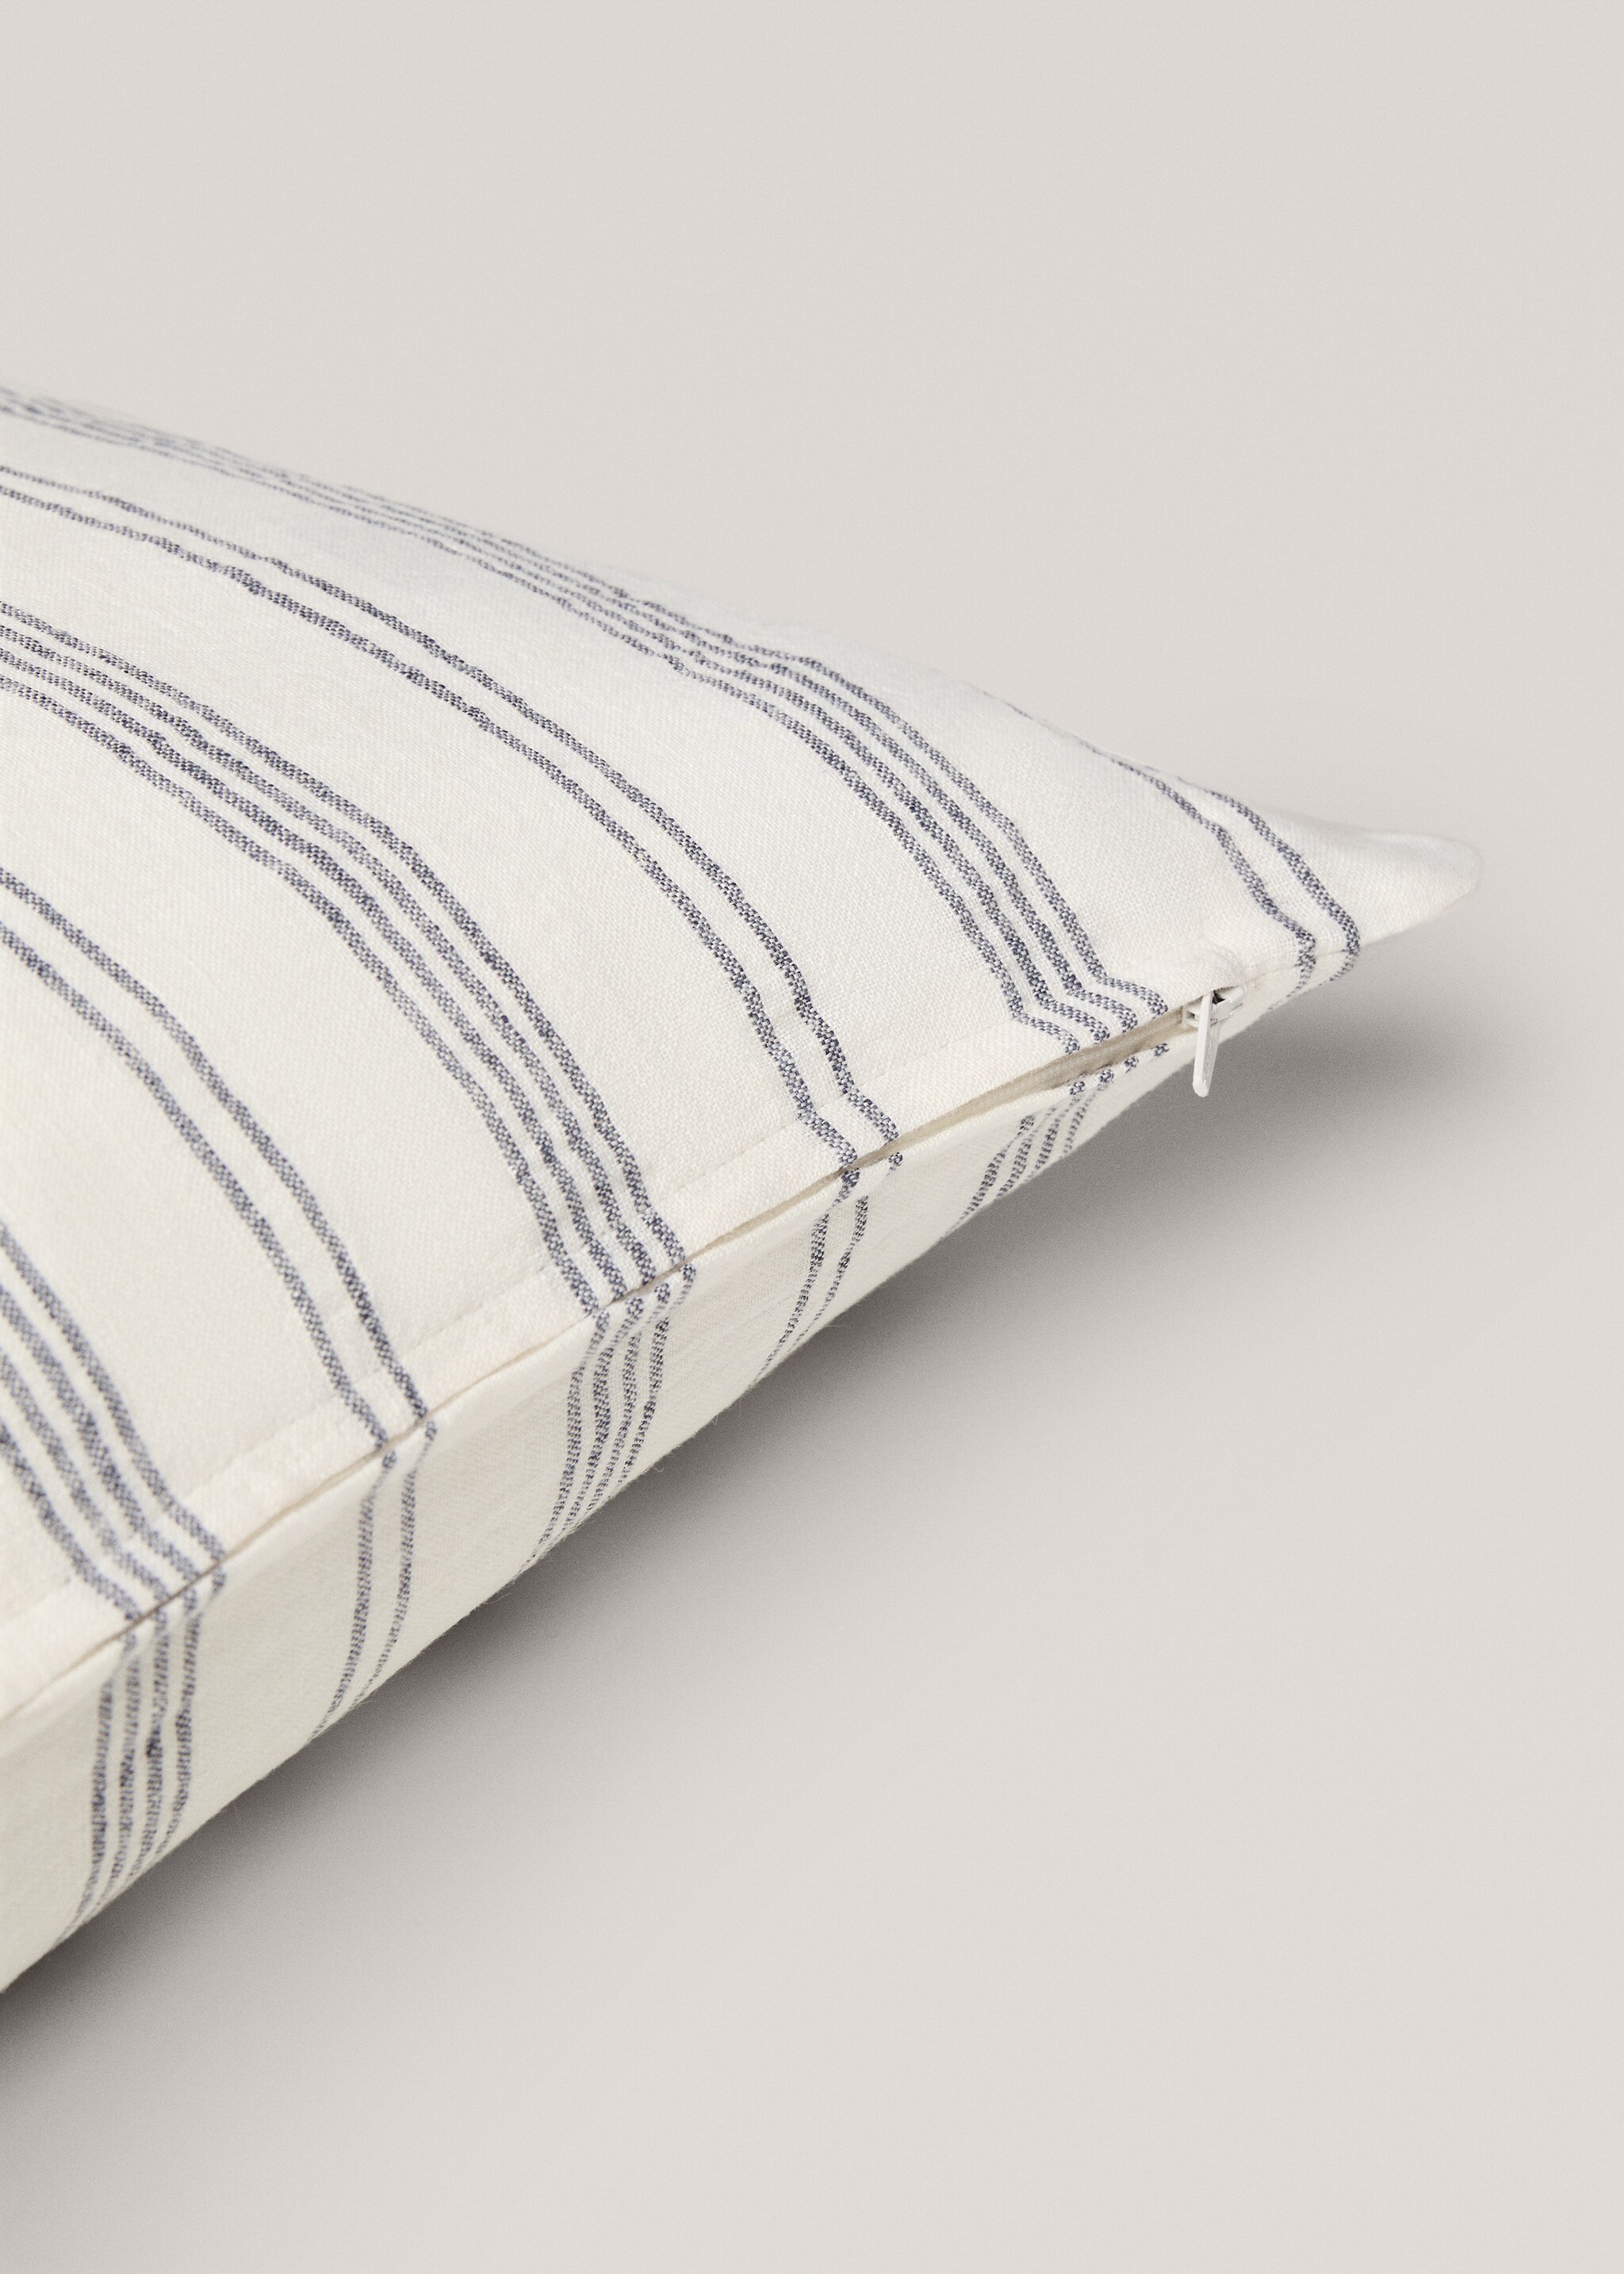 100% linen striped cushion cover 40x60cm - Details of the article 1